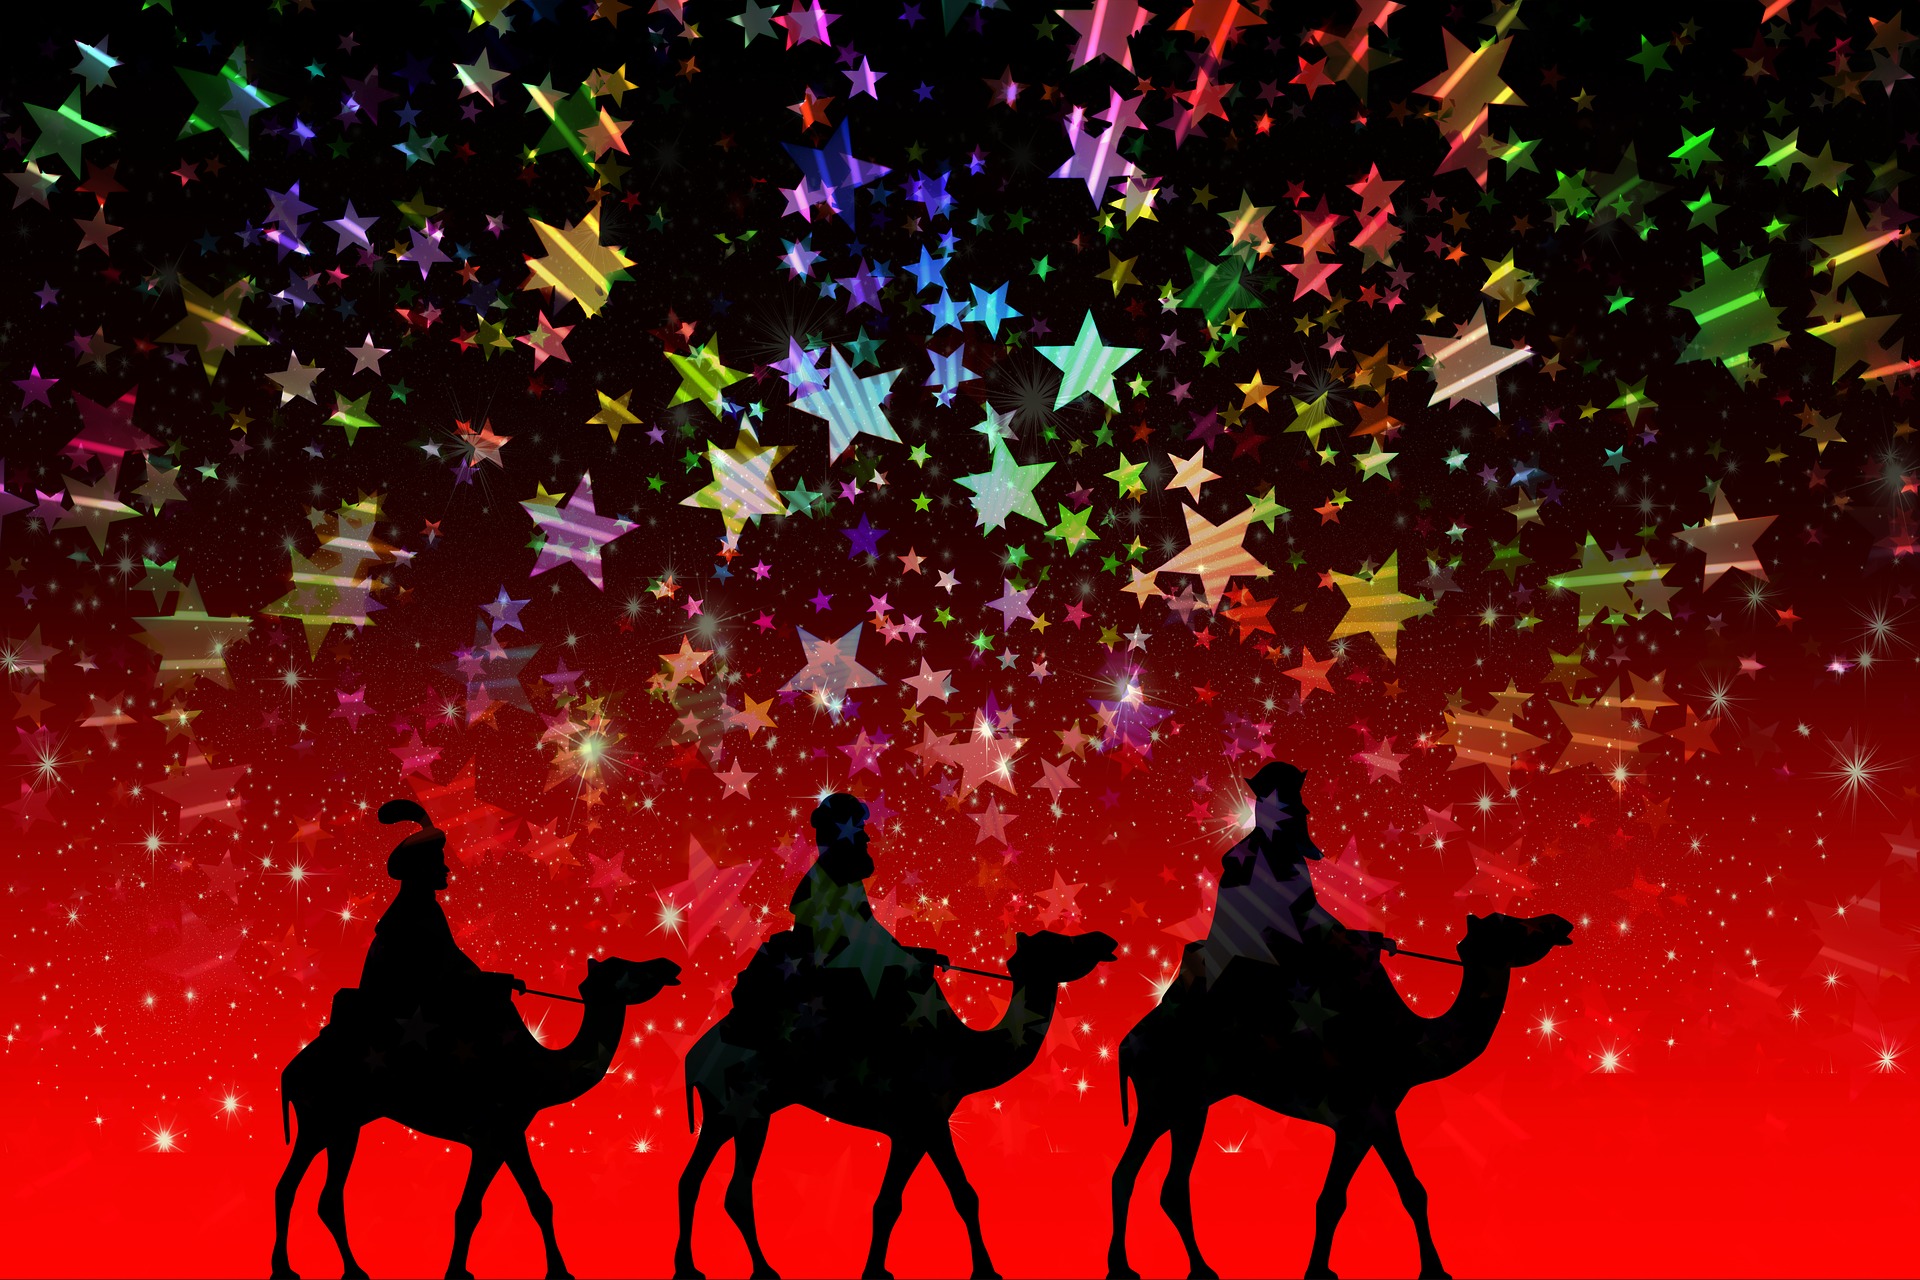 Silhouette of three kings on camels against red/black night sky. Multicolored stars above silhouettes.